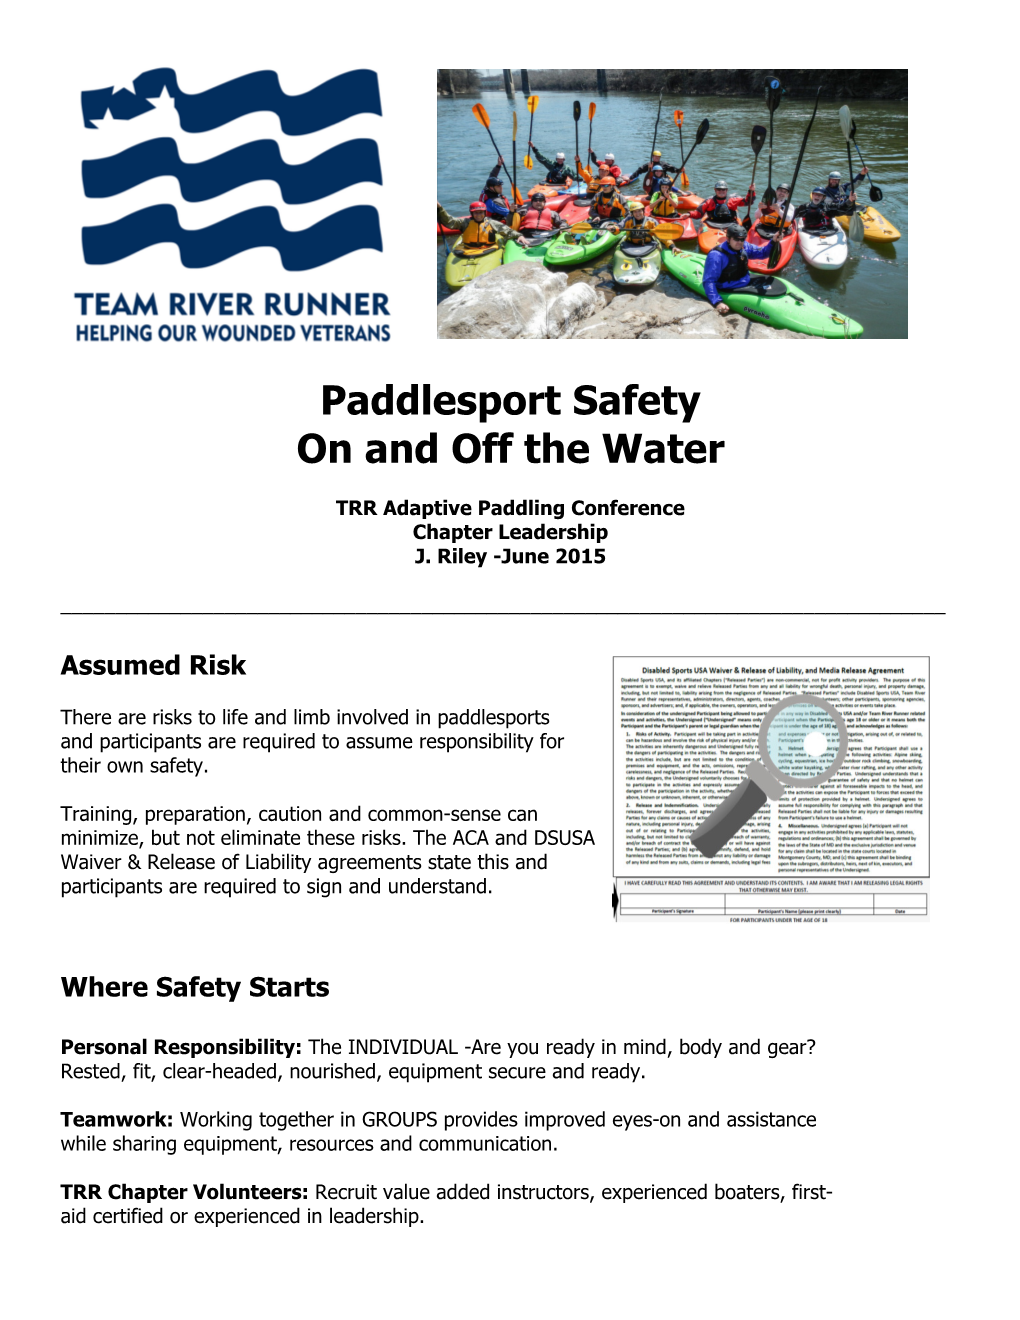 Paddlesport Safety on and Off the Water